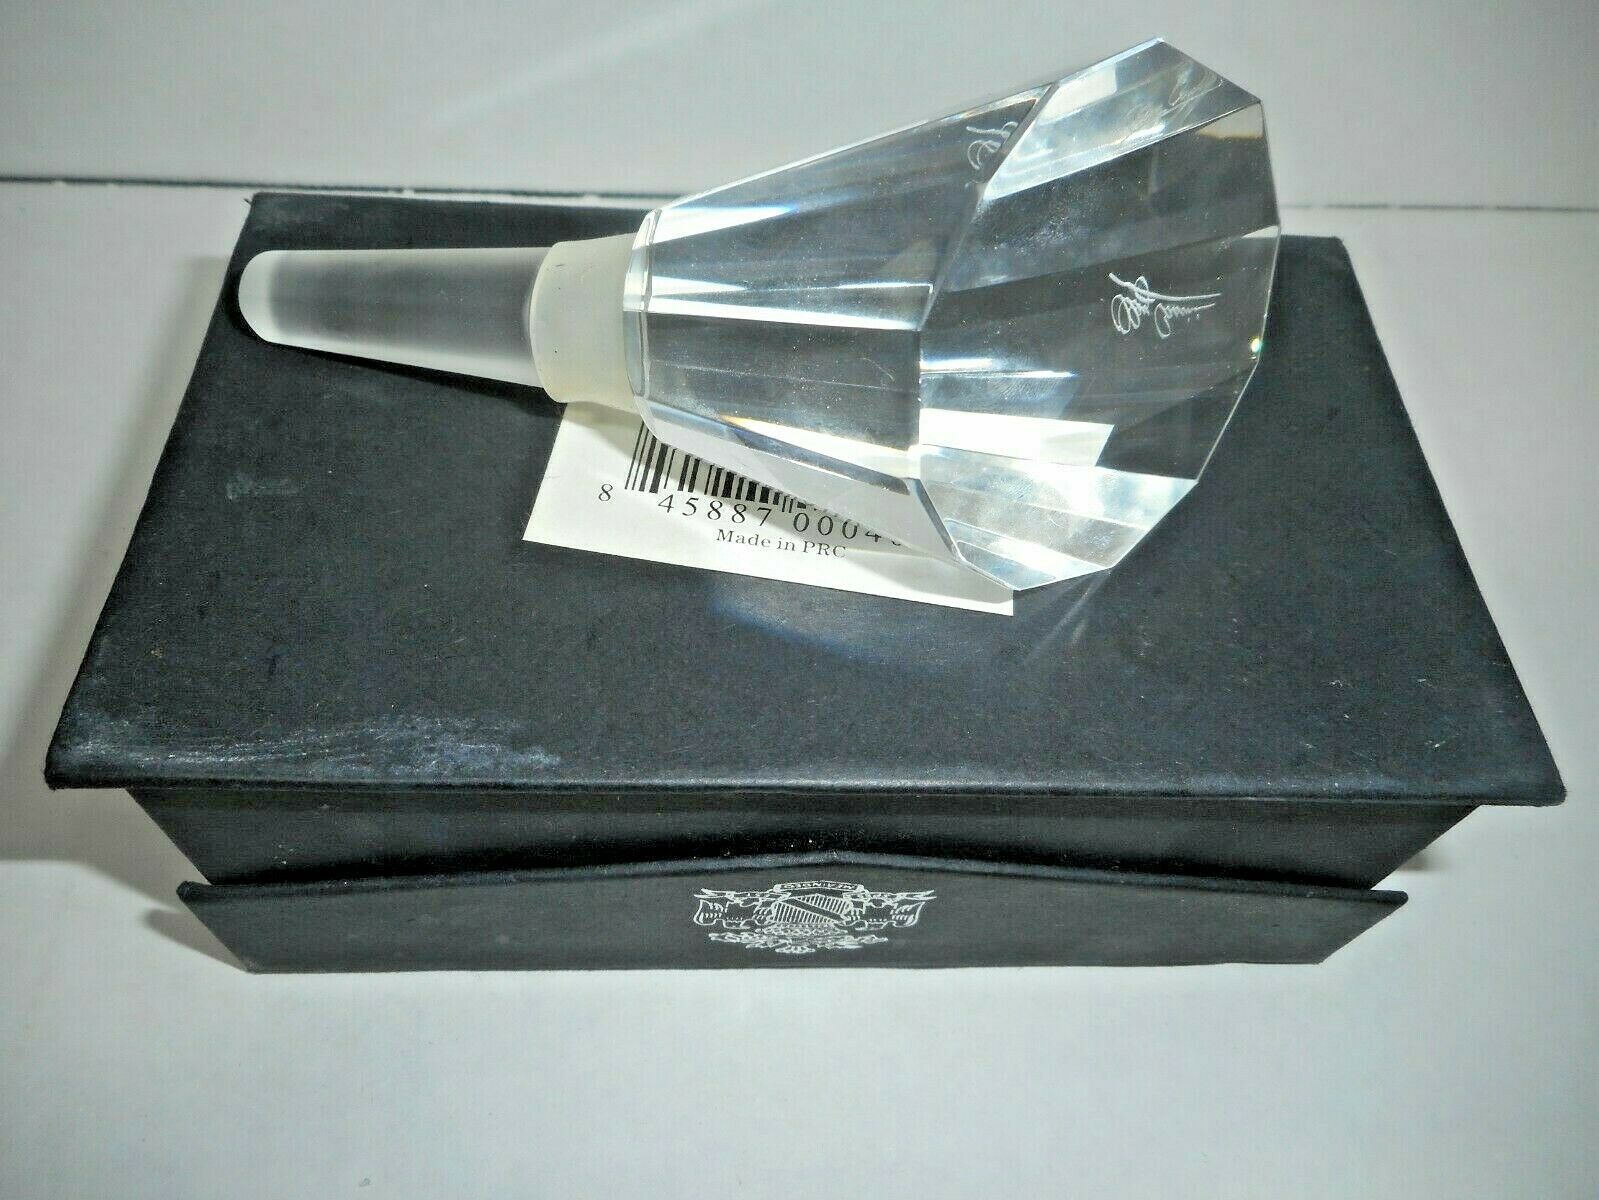 Oleg Cassini Faceted Crystal Solid Glass Bottle Stopper w/Etched Signature - $19.99